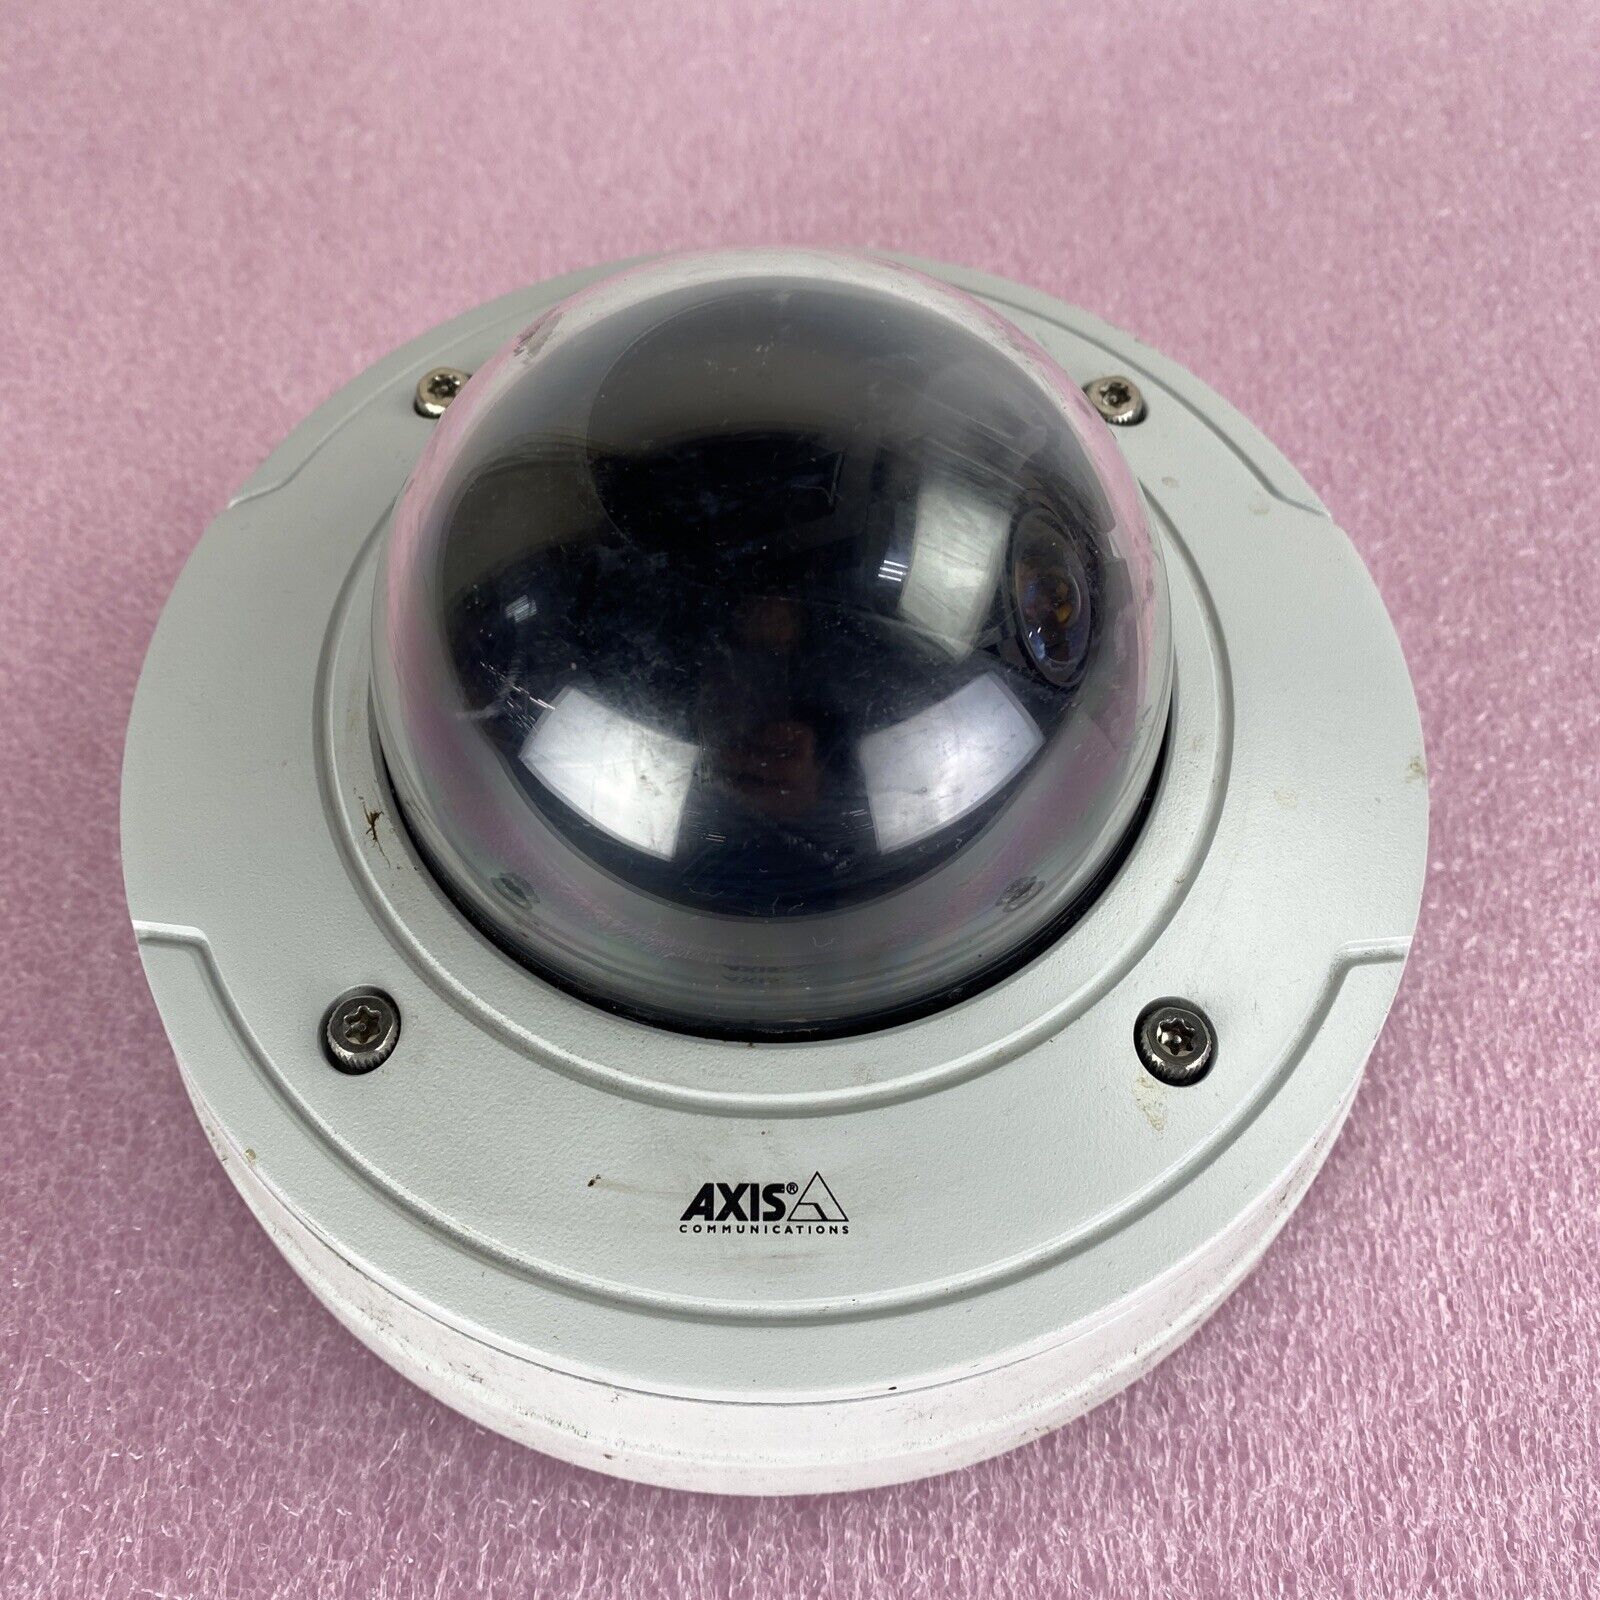 AXIS 0482-501-01 Vandal resistant P3343-VE 6MM POE network security camera